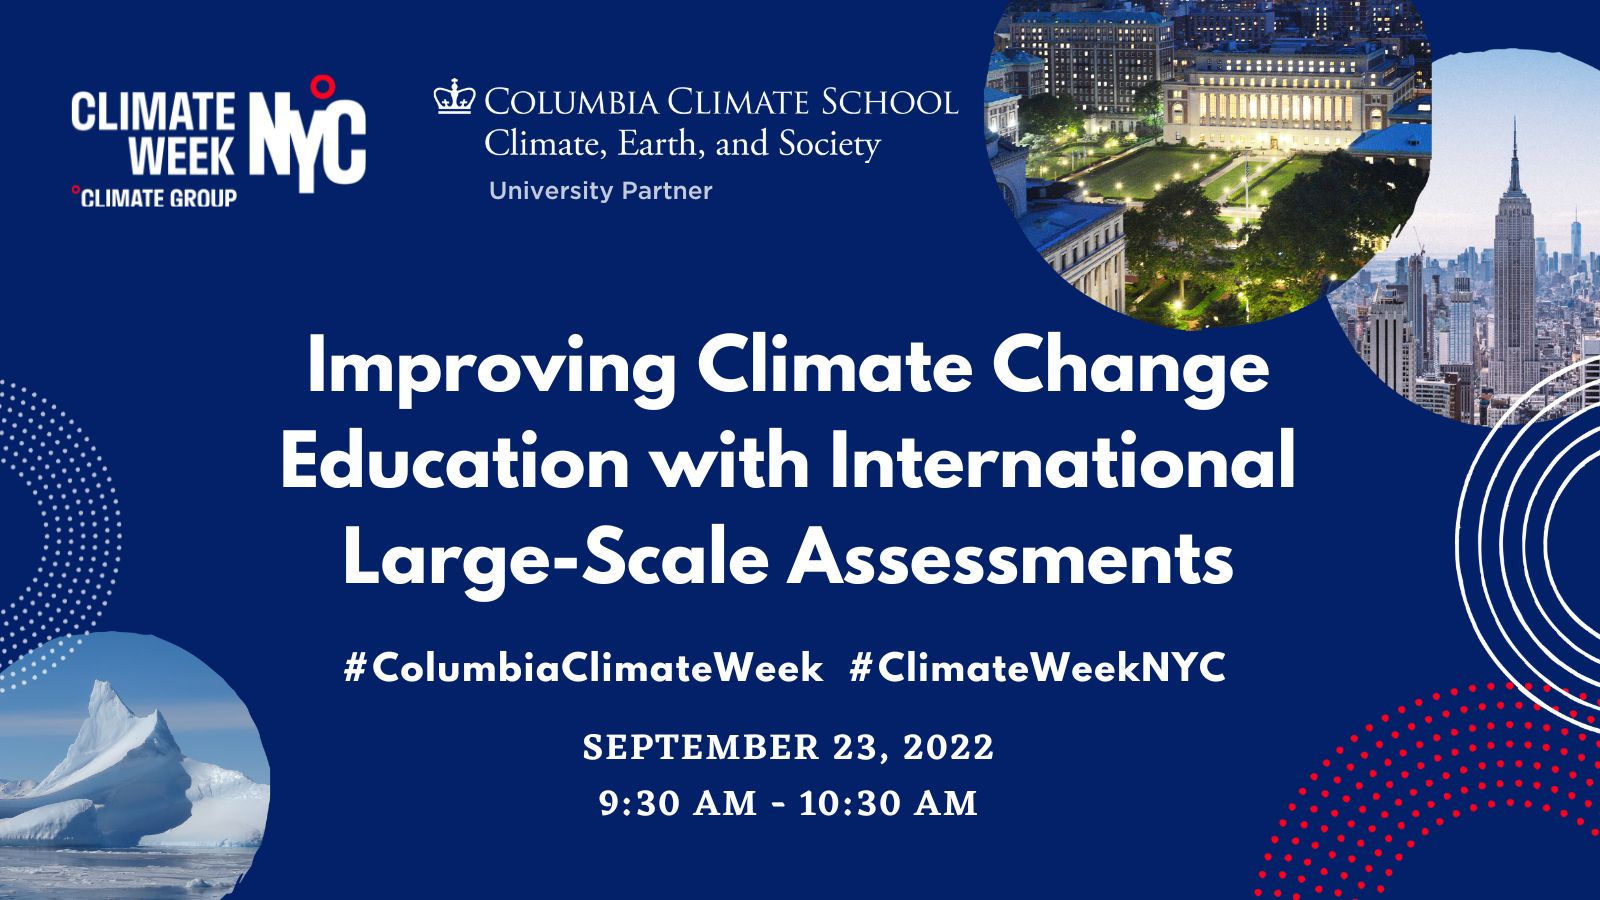 Event Flyer for Climate Week NYC | Improving Climate Change Education with International Large-Scale Assessments; For more details, refer to the event descriptions below.